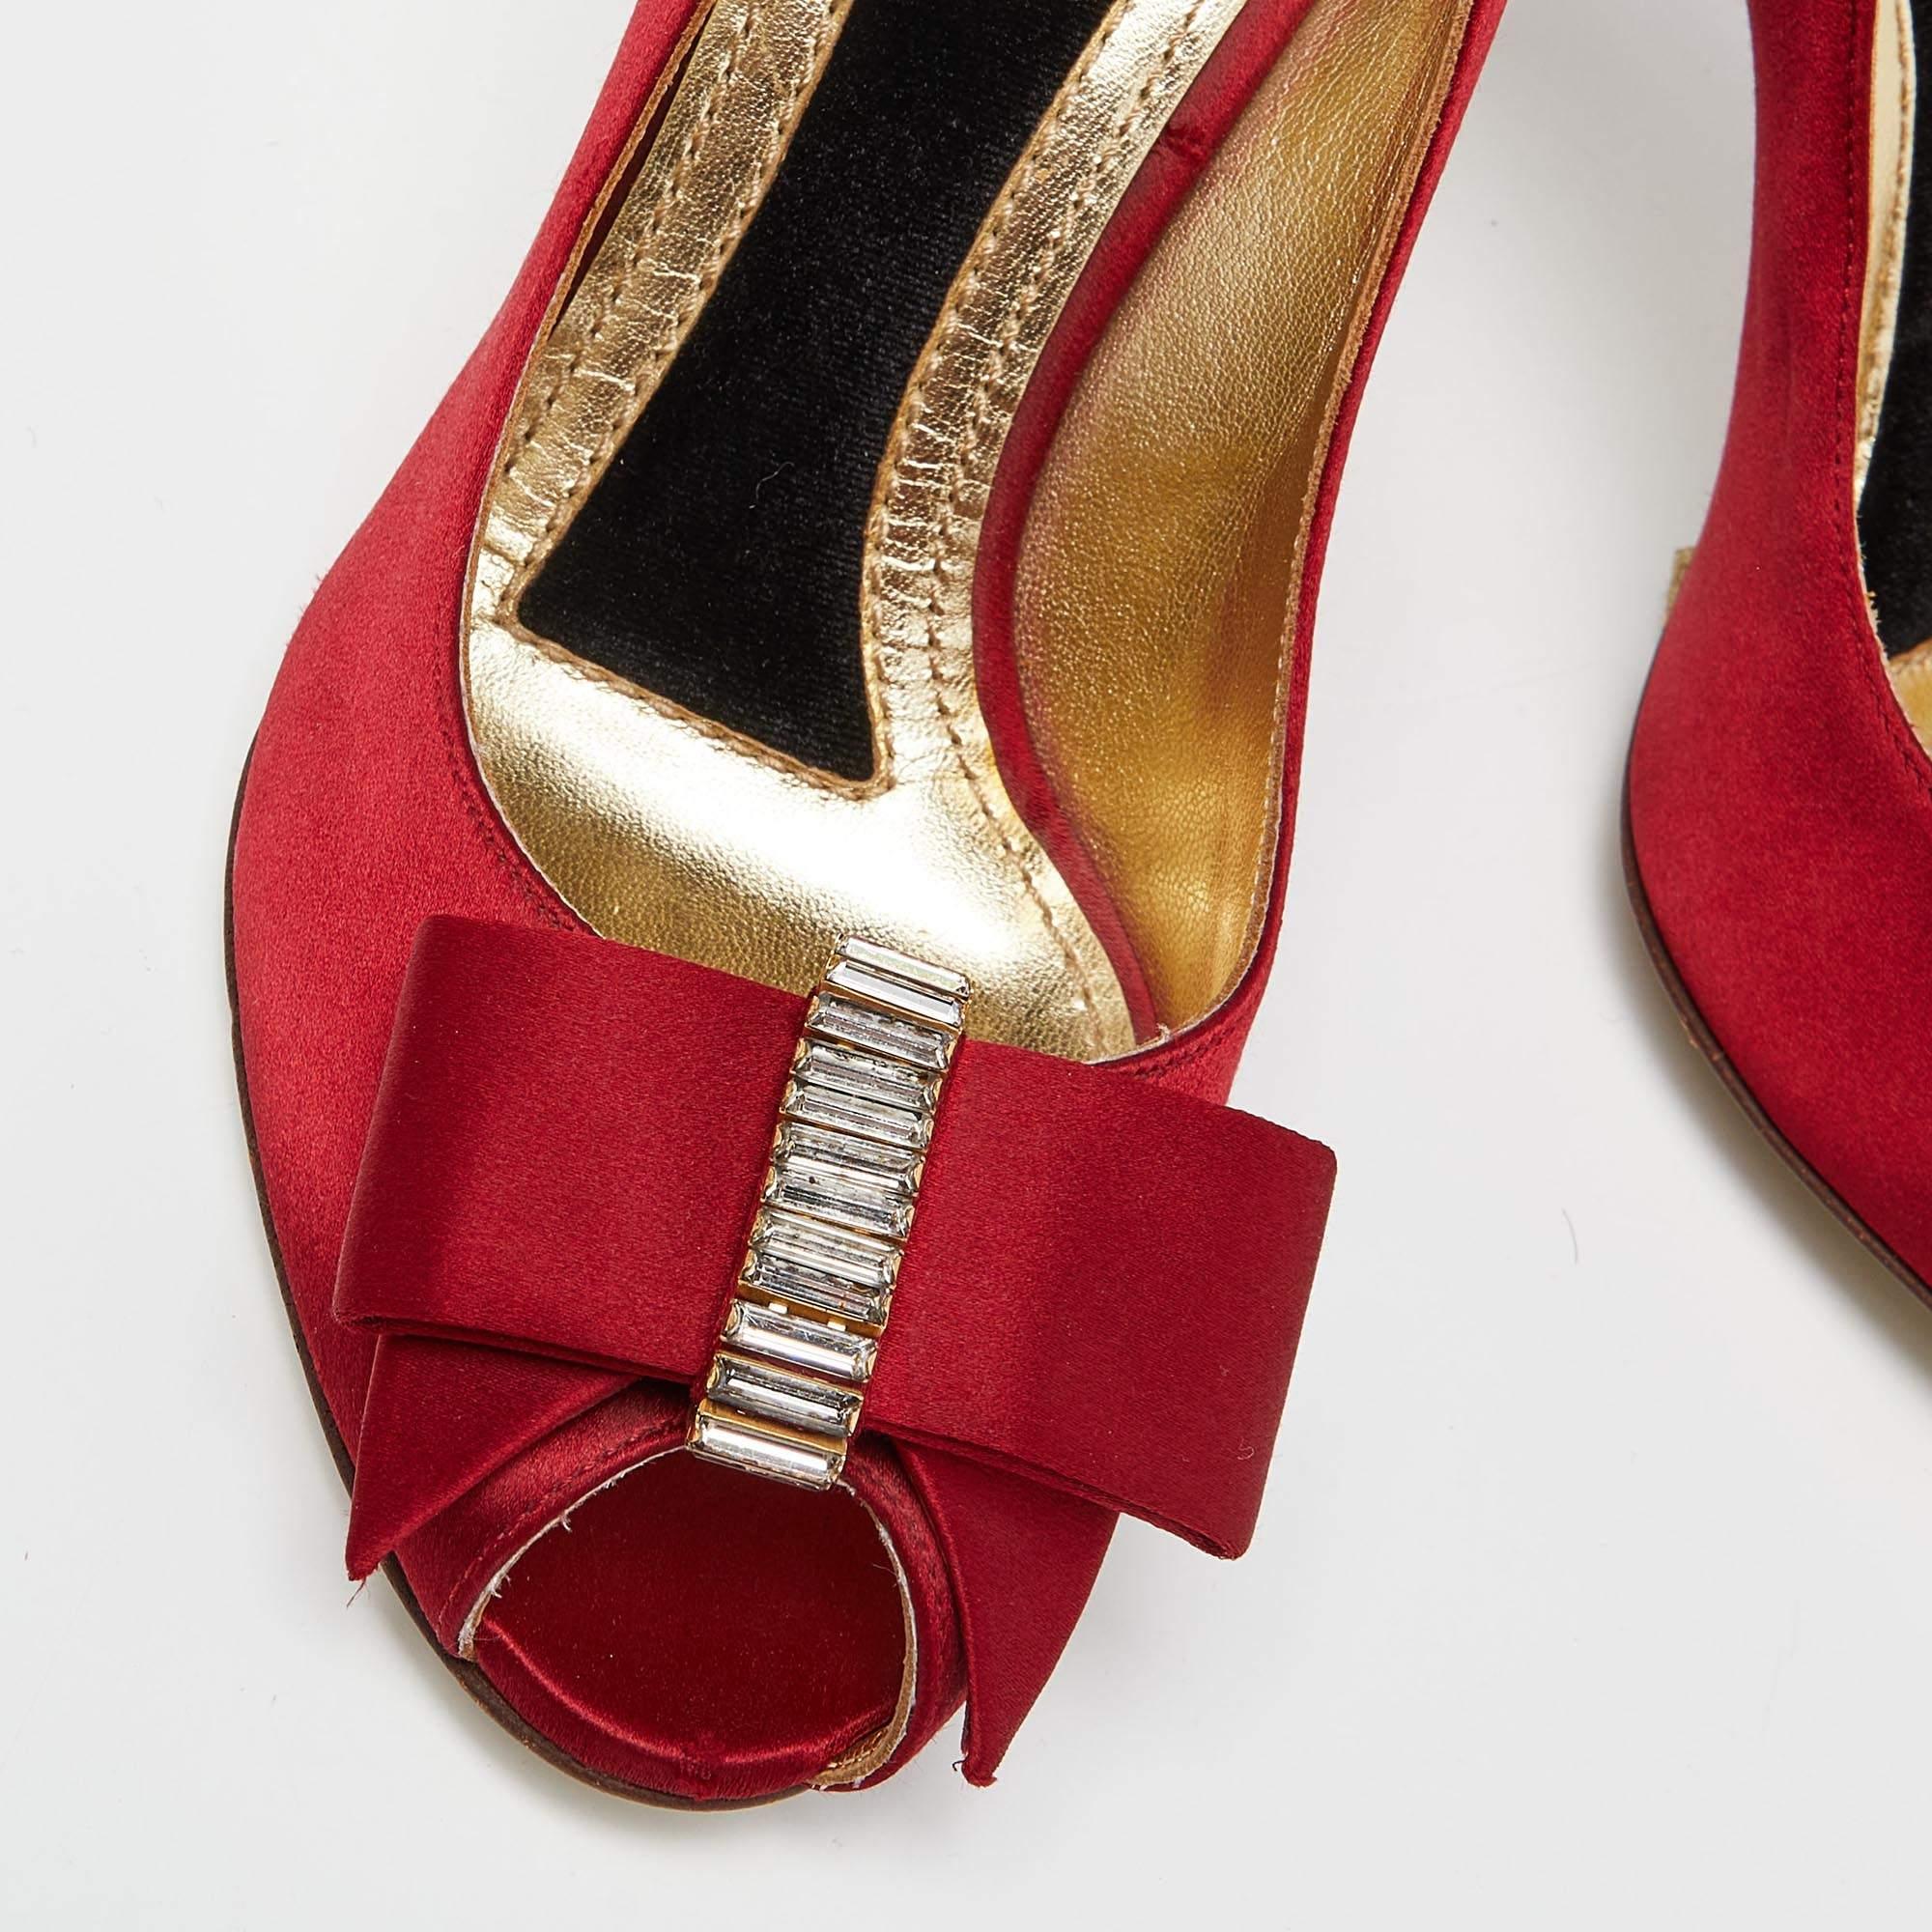 Dolce & Gabbana Red Satin Crystal Embellished Bow Peep Toe Pumps Size 37 For Sale 3